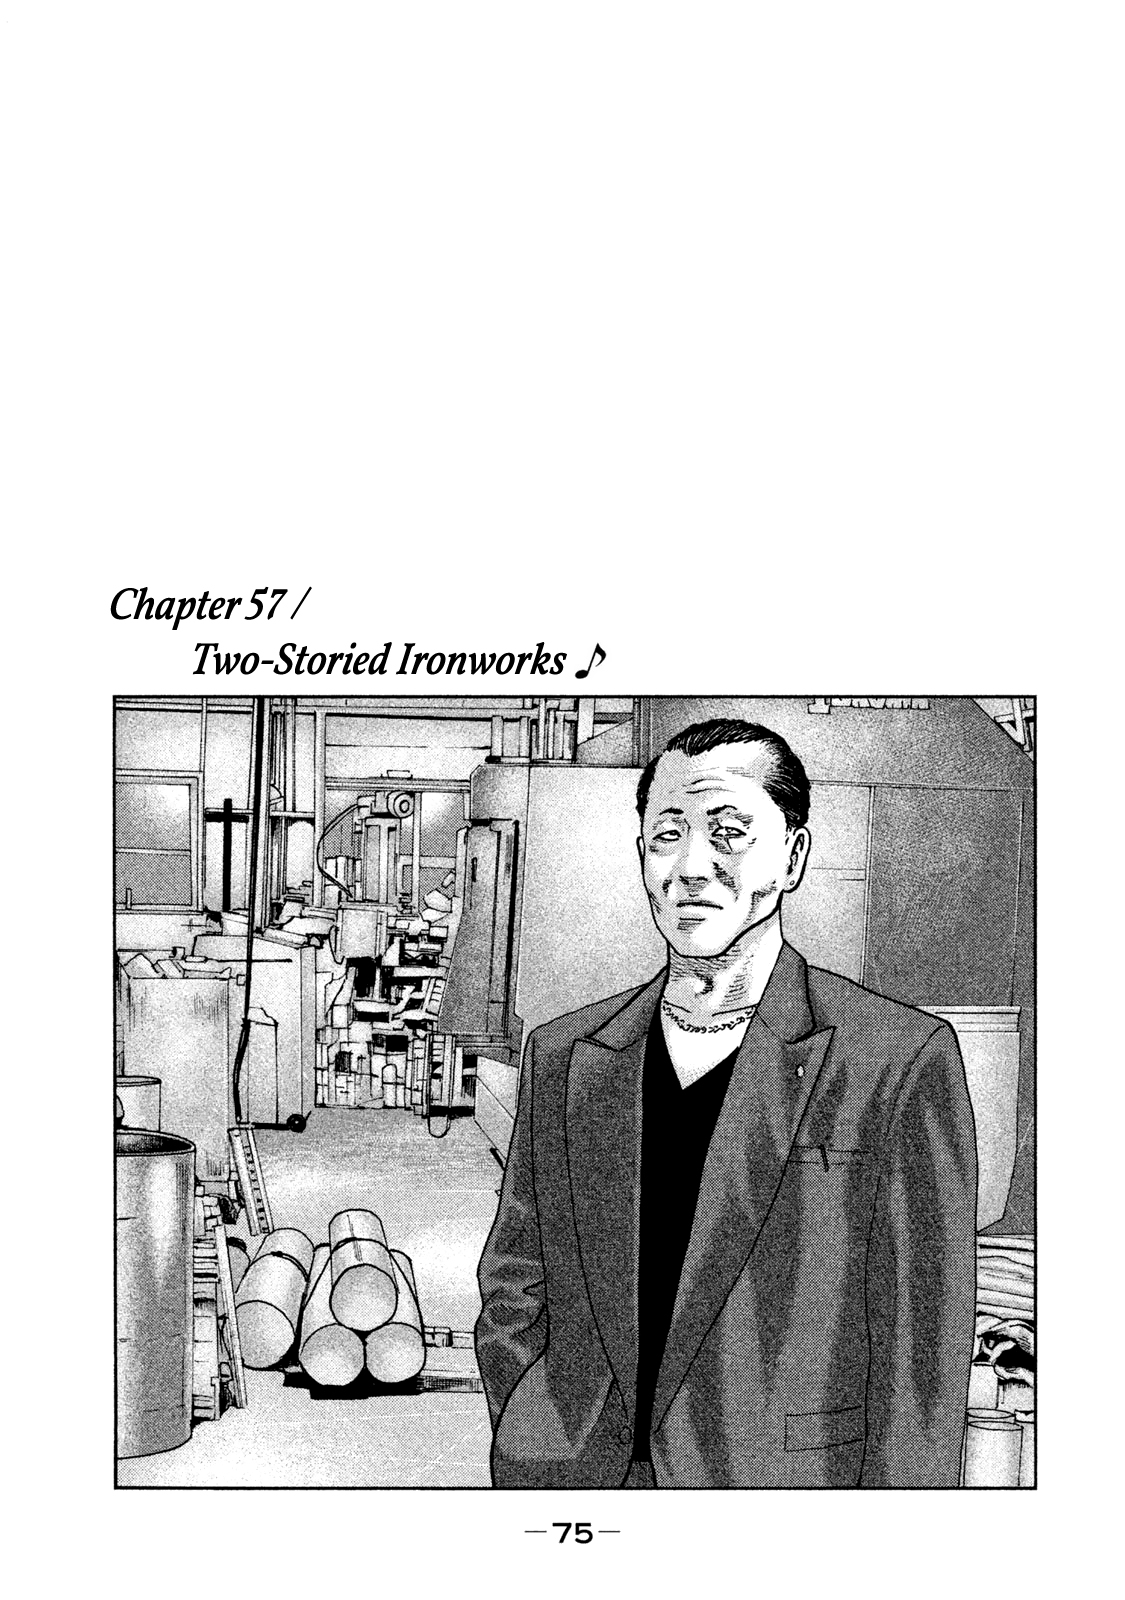 The Fable Vol. 6 Ch. 57 Two Storied Ironworks